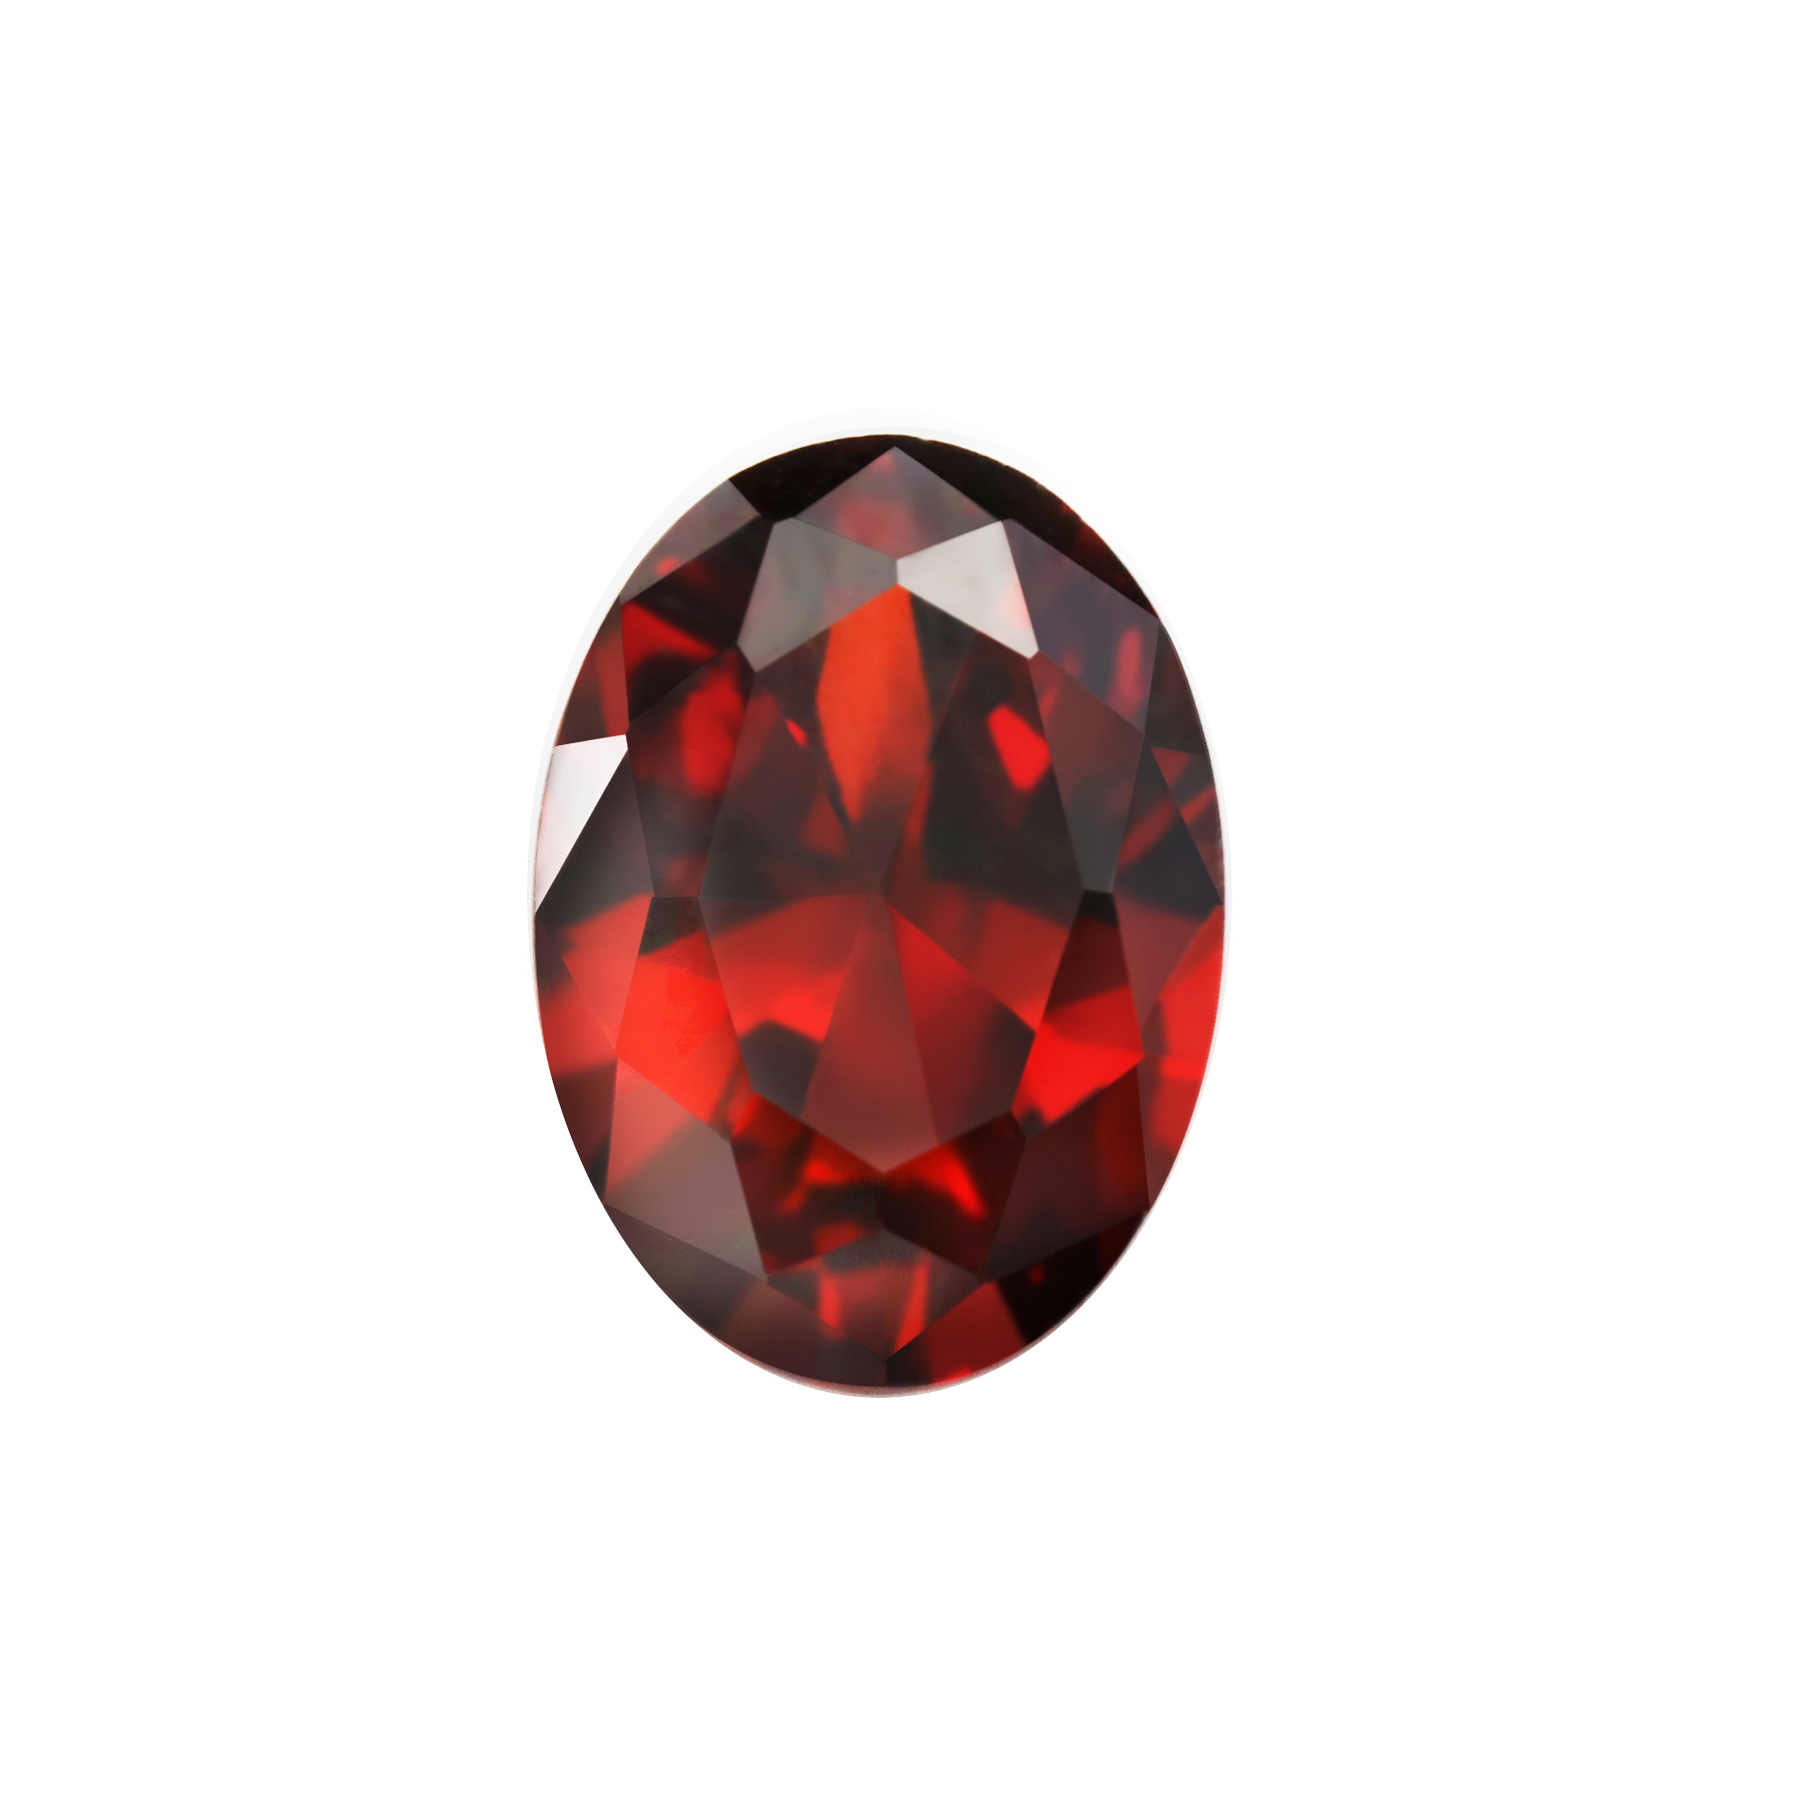 5Pcs January February April June August October November Imitation Garnet Birthstone Oval Faceted Cubic Zirconia CZ Stone DIY Loose Stone Supplies 4120142-1 - Click Image to Close